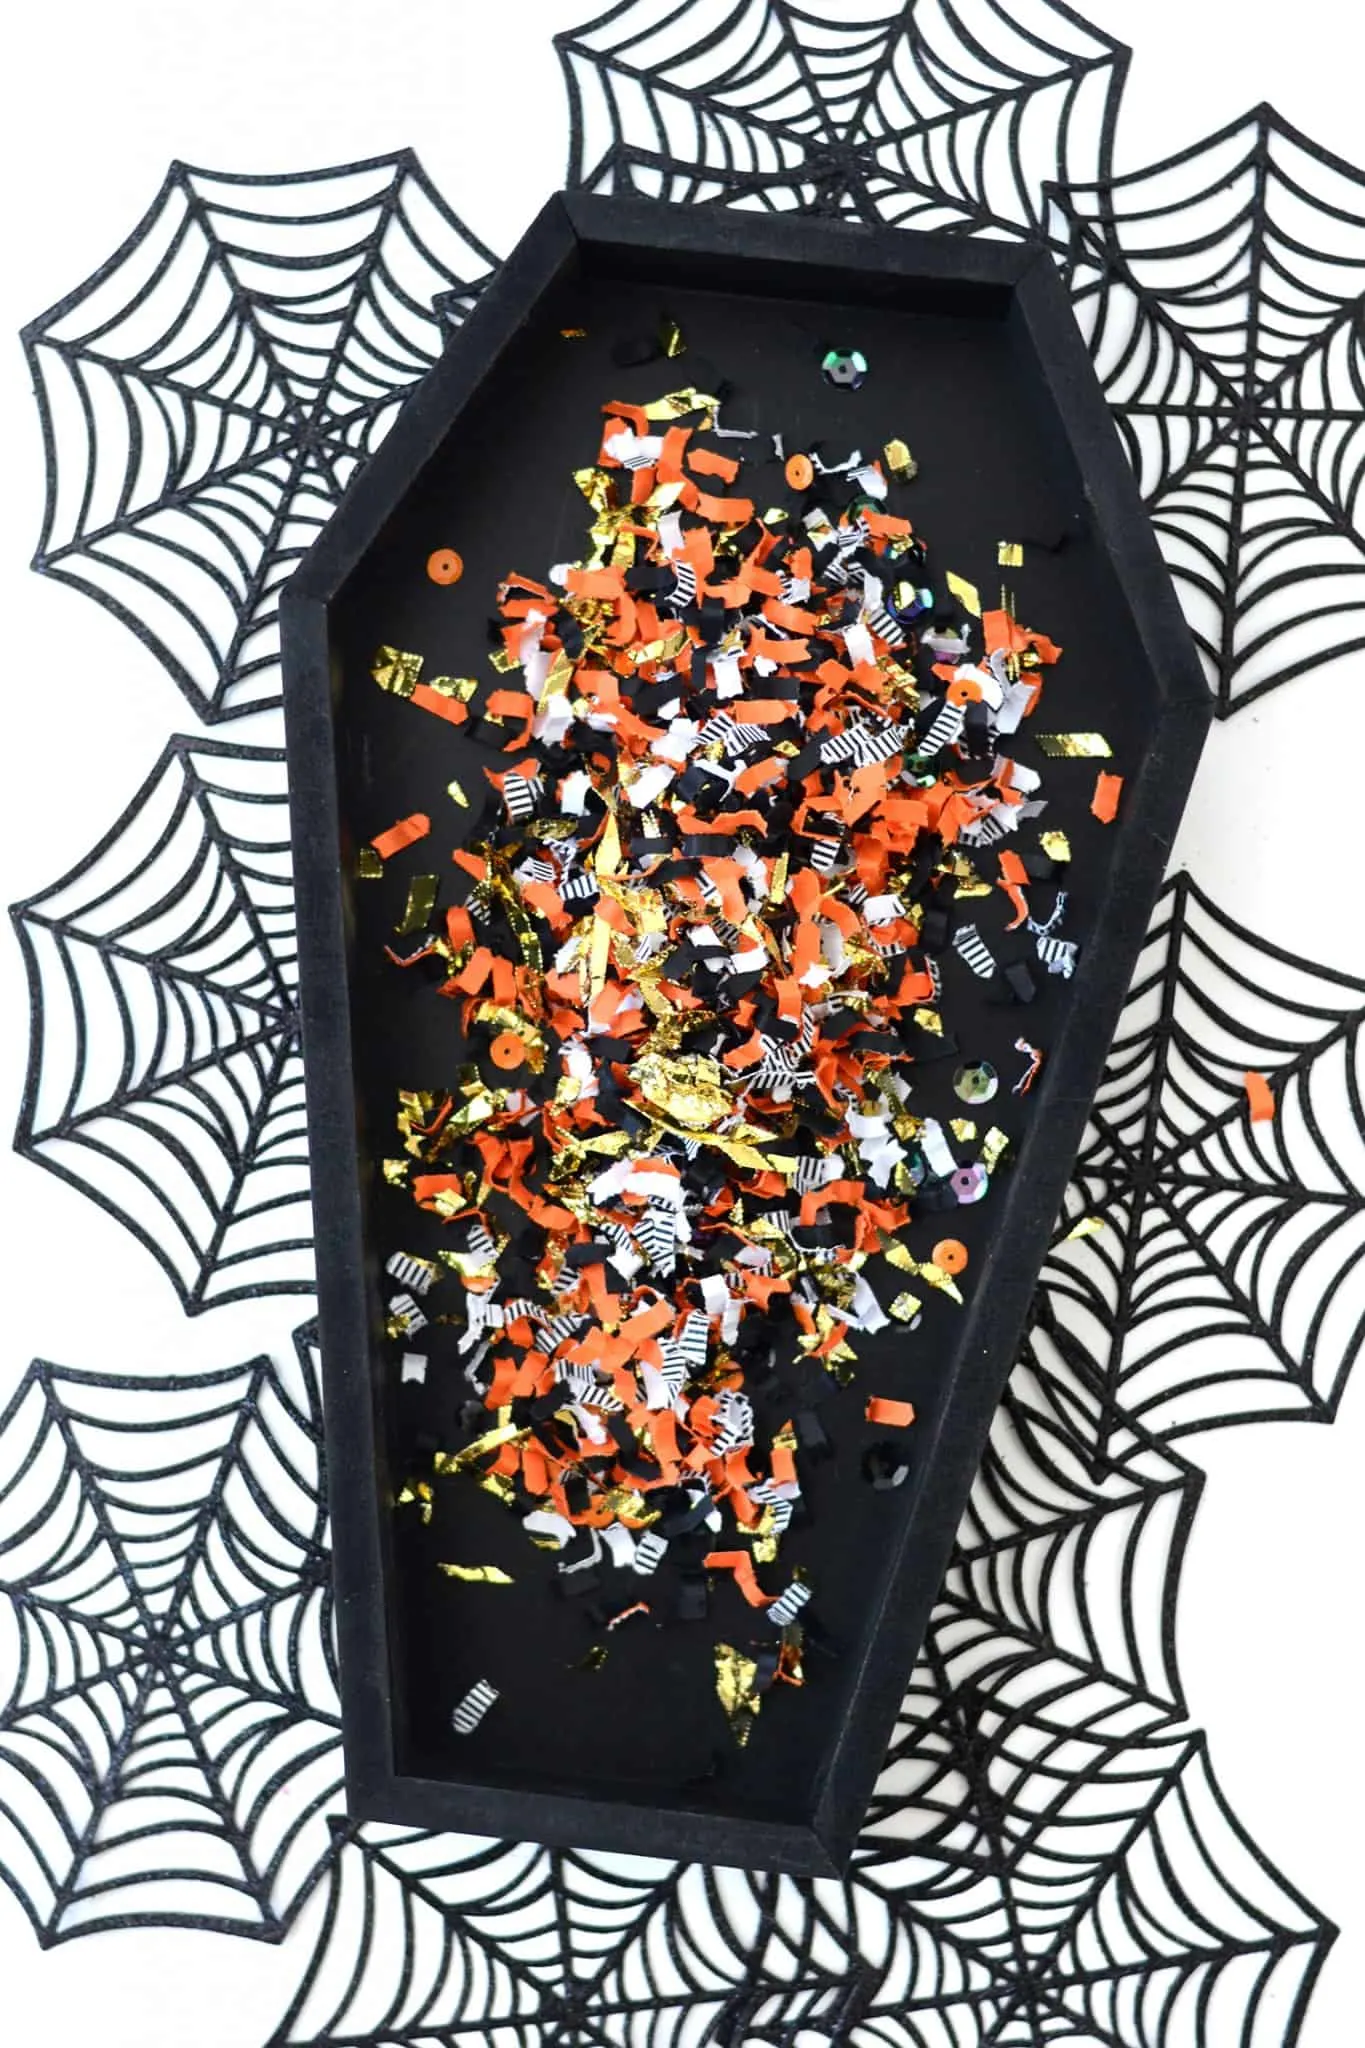 Black wood coffin sprinkled with confetti